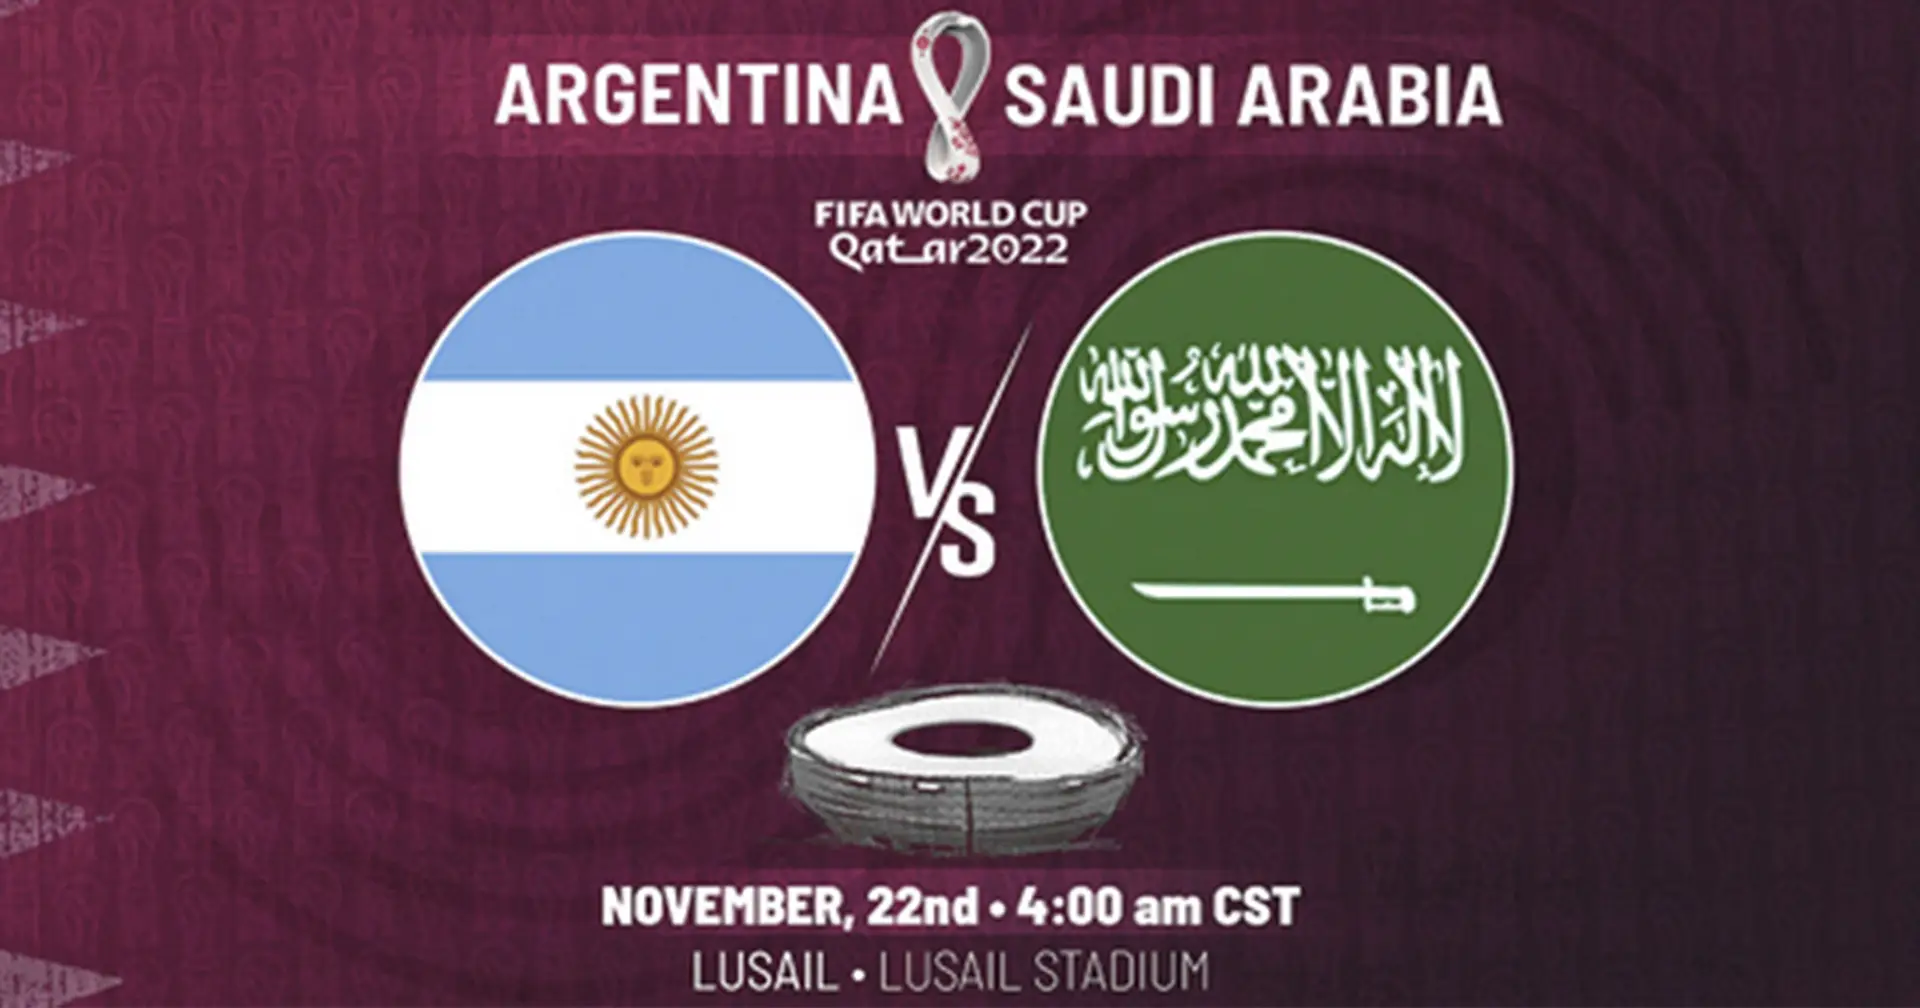 Argentina v Saudi Arabia: Official team lineups for the World Cup clash revealed